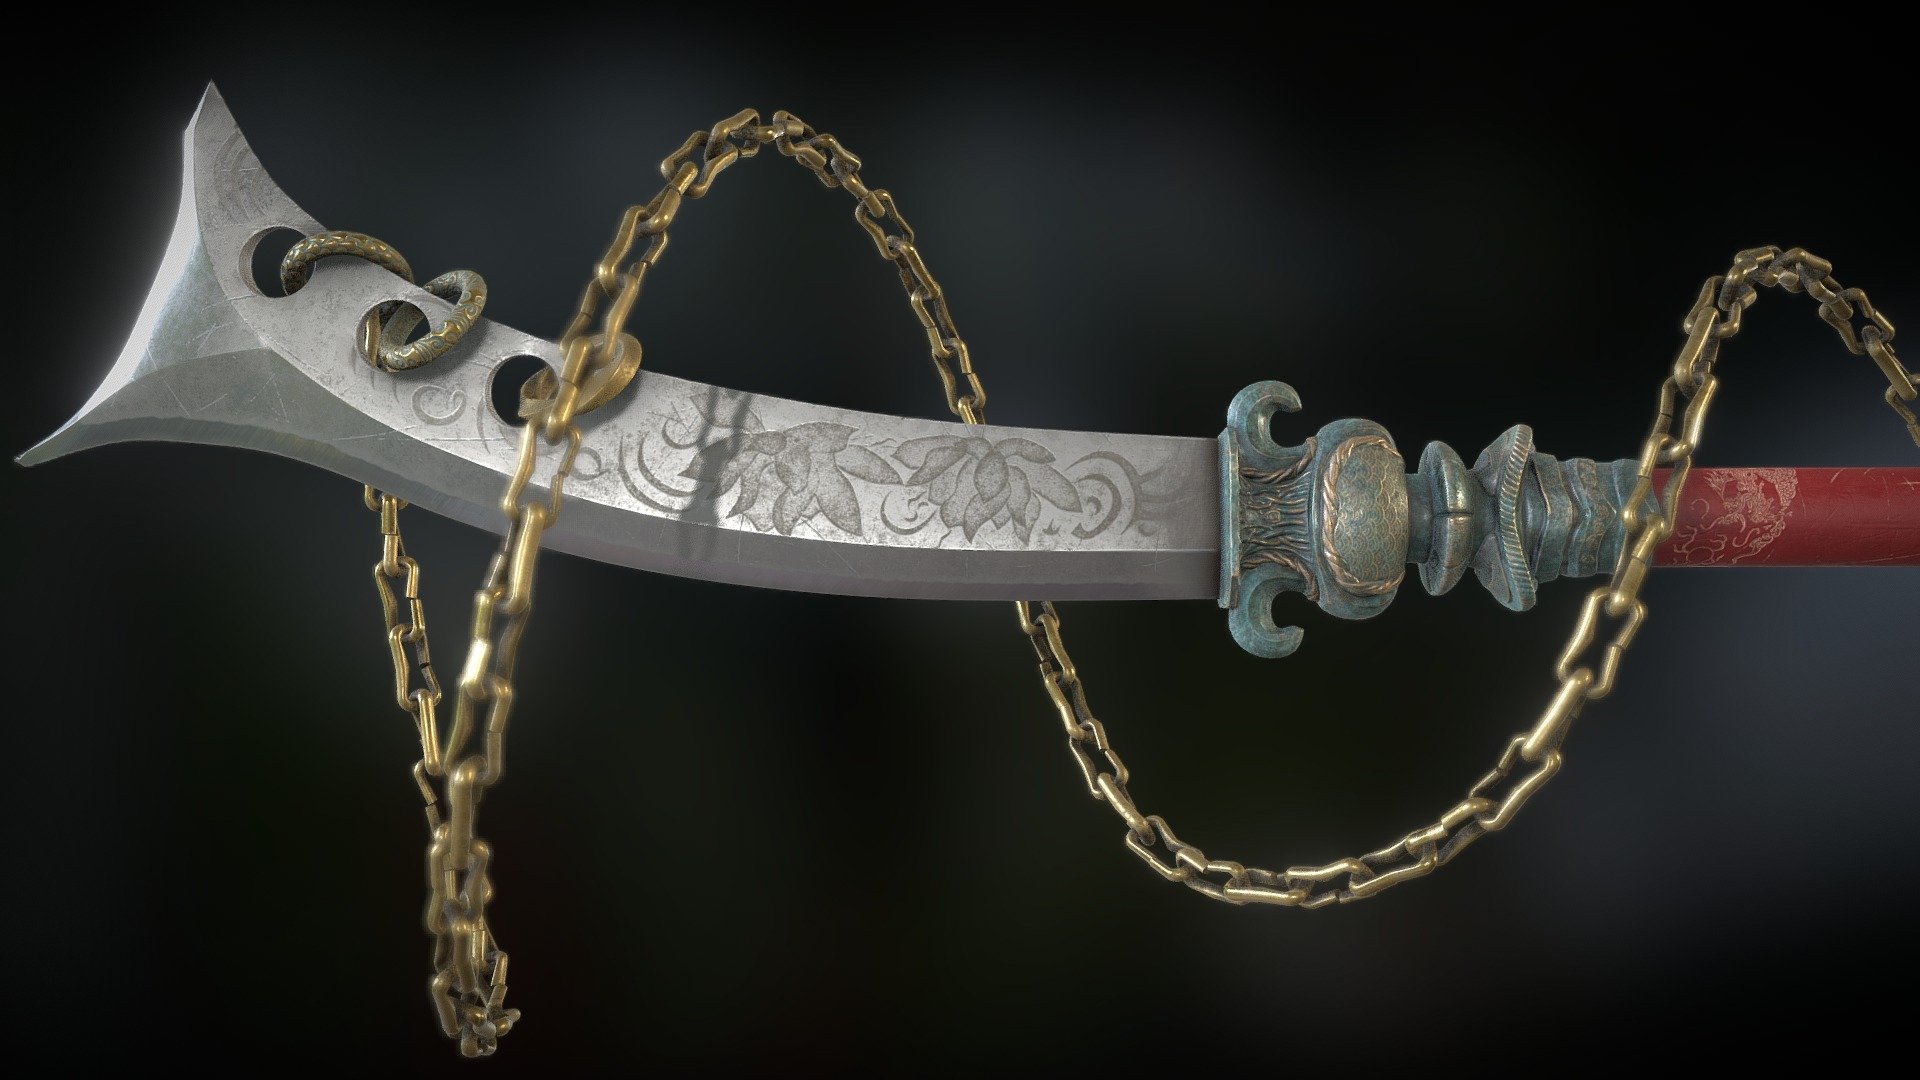 This is one of three props I created for the Artstation Challenge &lsquo;Feudal Japan: the Shogunate' (15oct - 3dec 2018).
Concept by Enrico Camerra.
Modeled in Blender and Zbrush and textured in Substance Painter.
Link to my contest submission: https://bit.ly/2PIvspm - ArtstationContest FeudalJapan-WARLORD NAGINATA - 3D model by MASMO (@massimo.caggese) 3d model